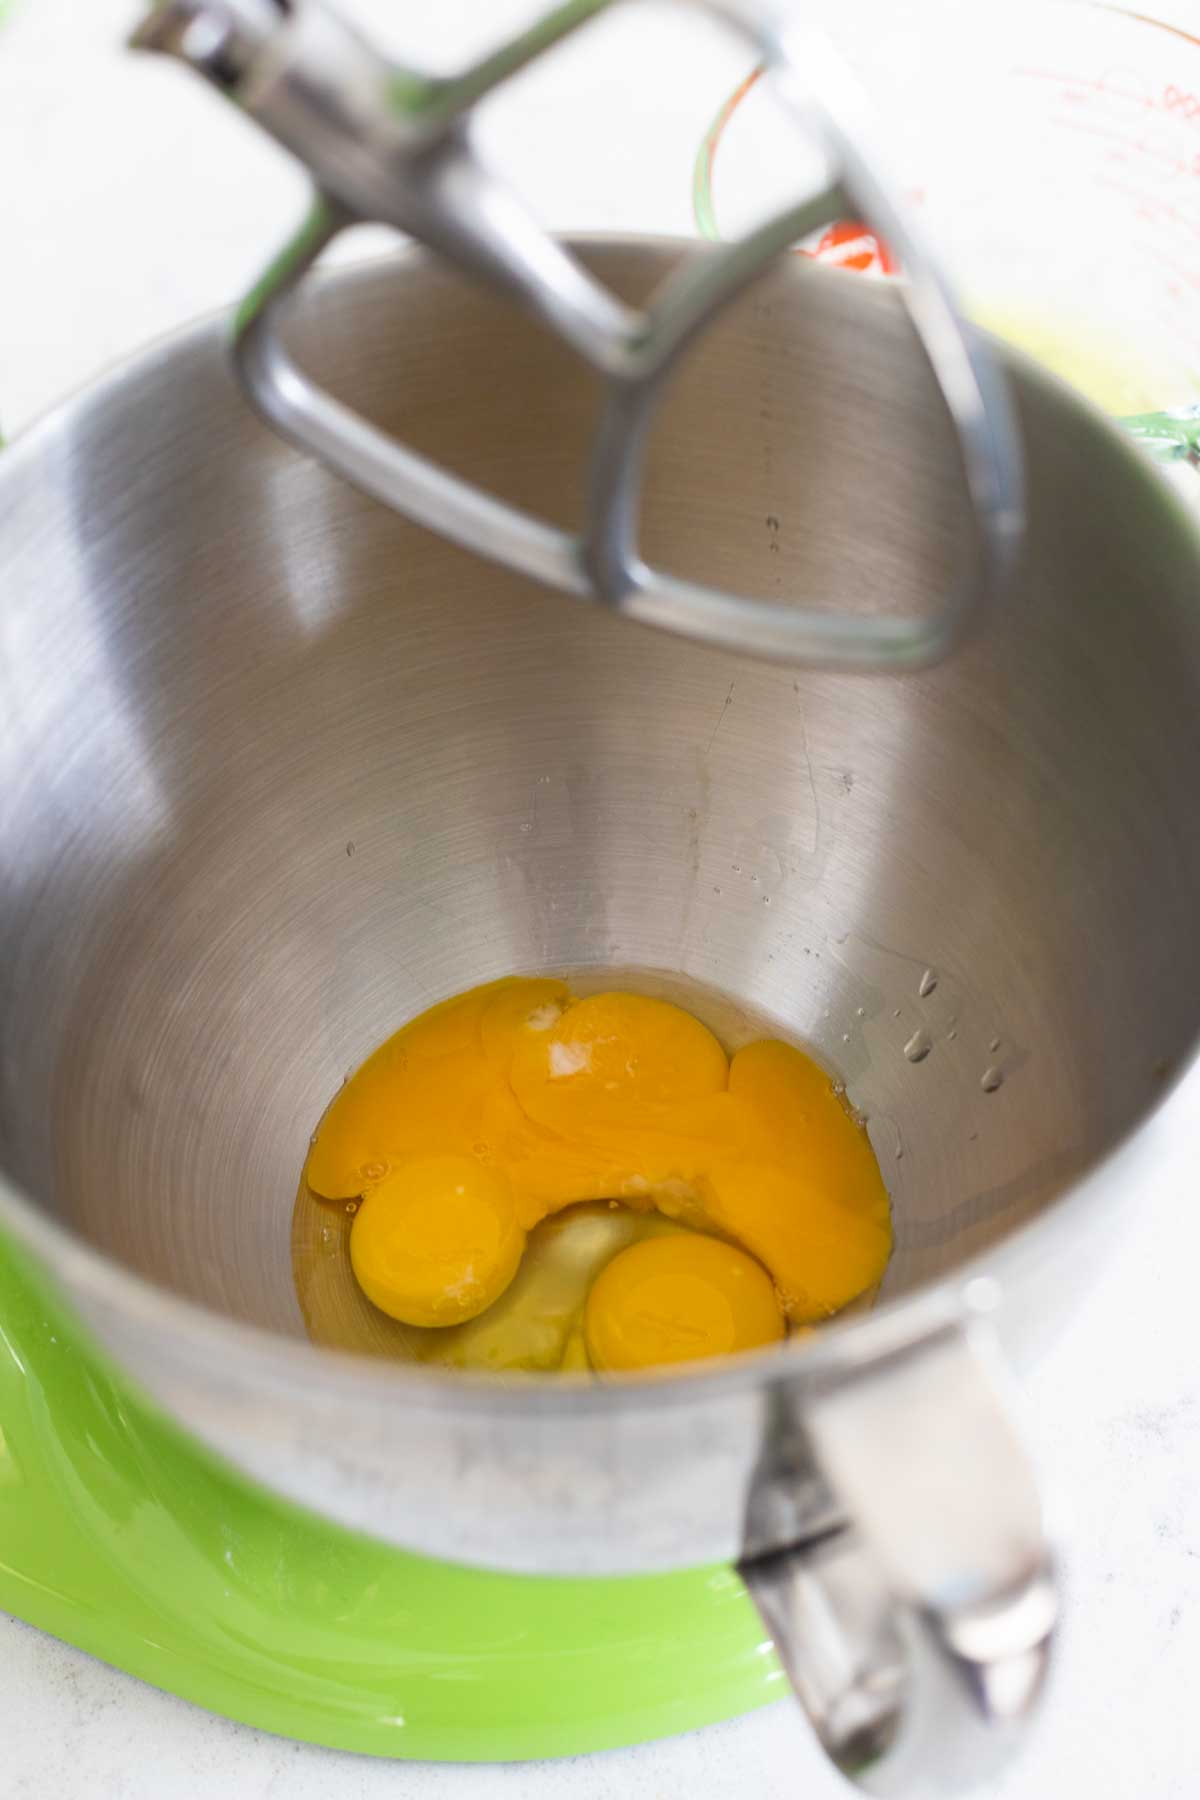 Egg yolks and sugar in a mixing bowl.